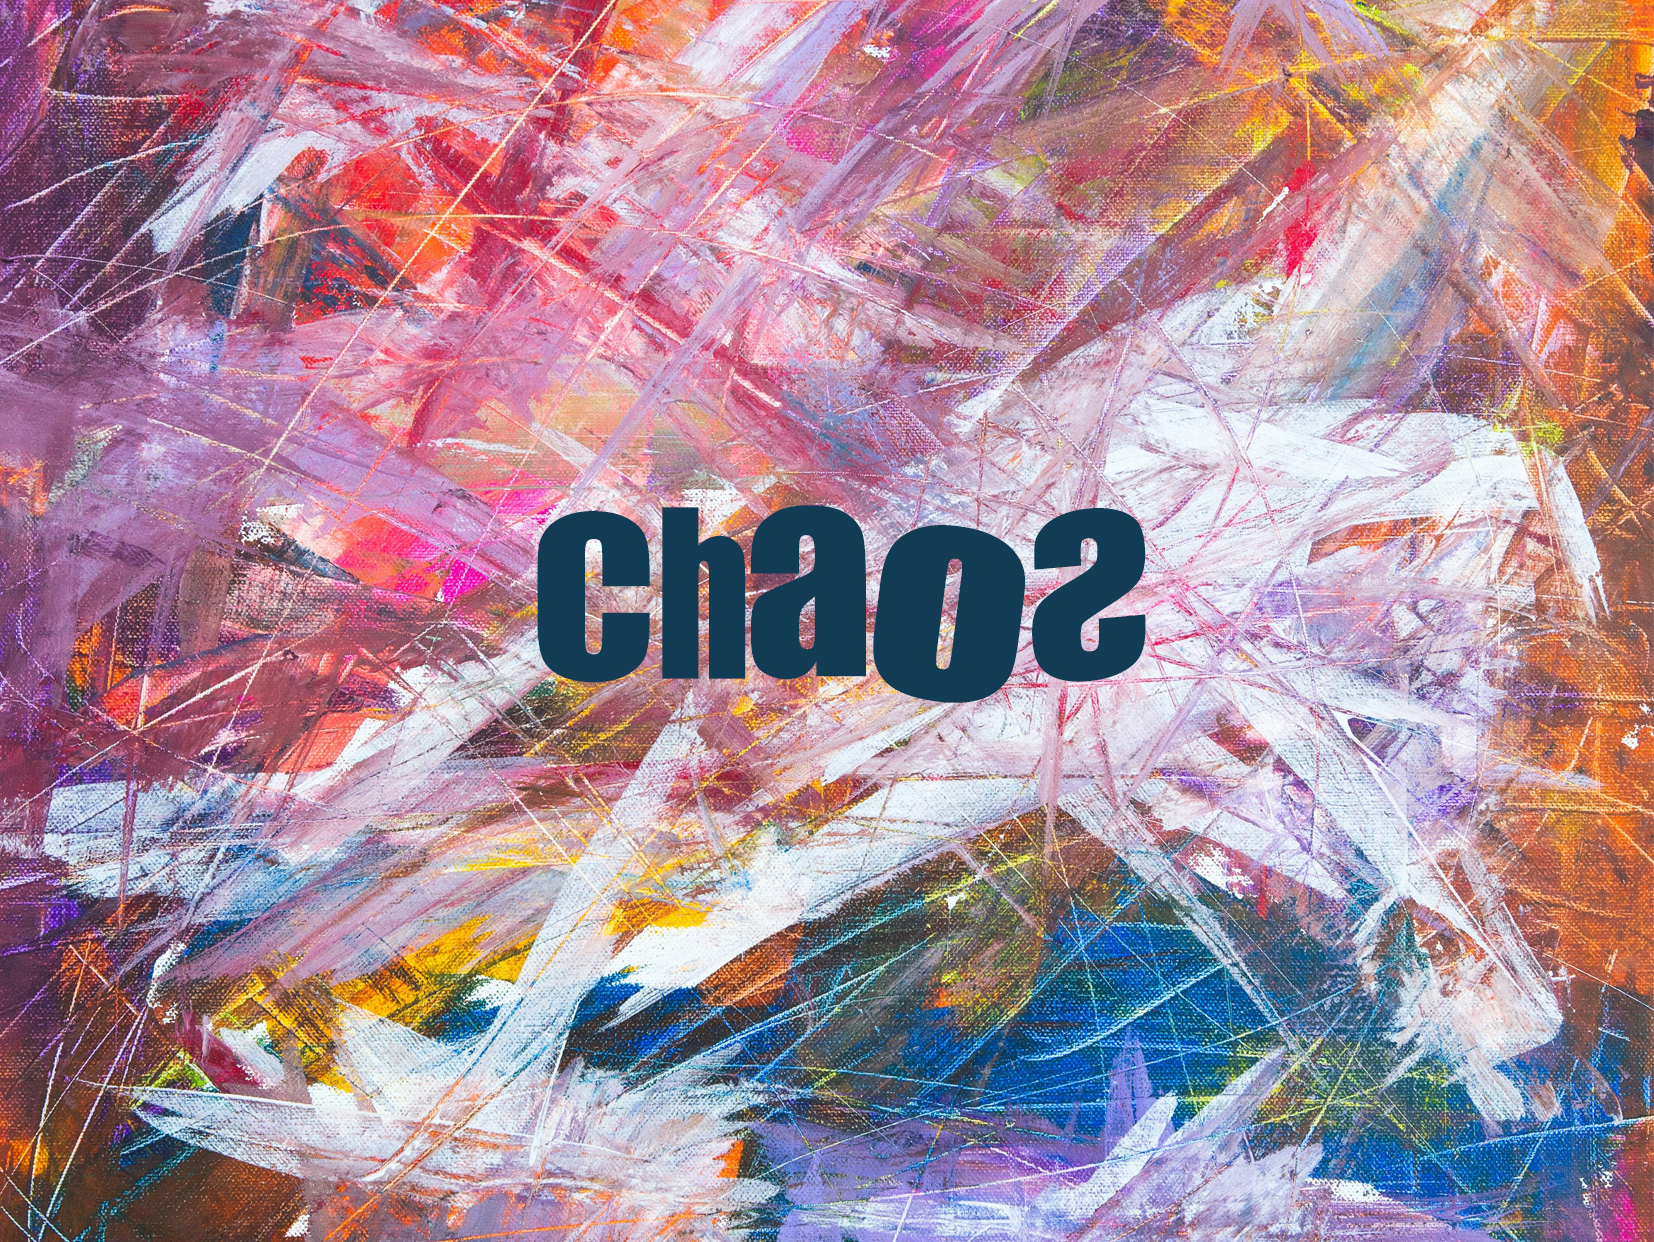 What Does A Chaos Mean In Art?